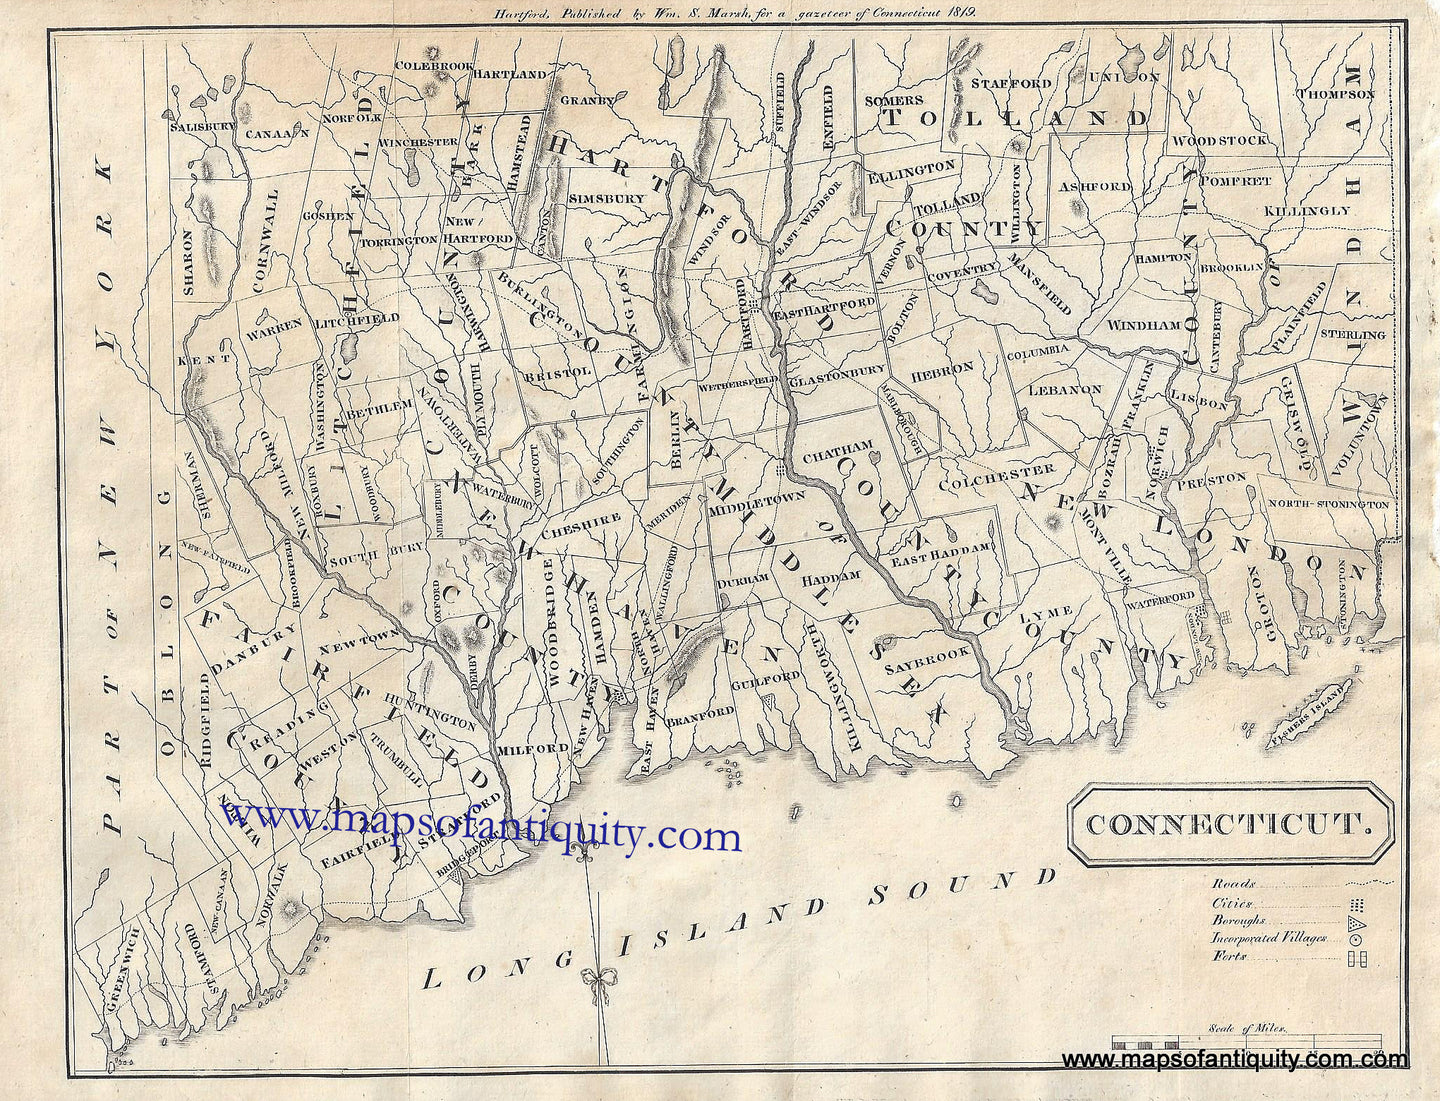 Antique-Black-and-White-Map-Connecticut-**********-United-States-Connecticut-1819-Lockwood-Maps-Of-Antiquity